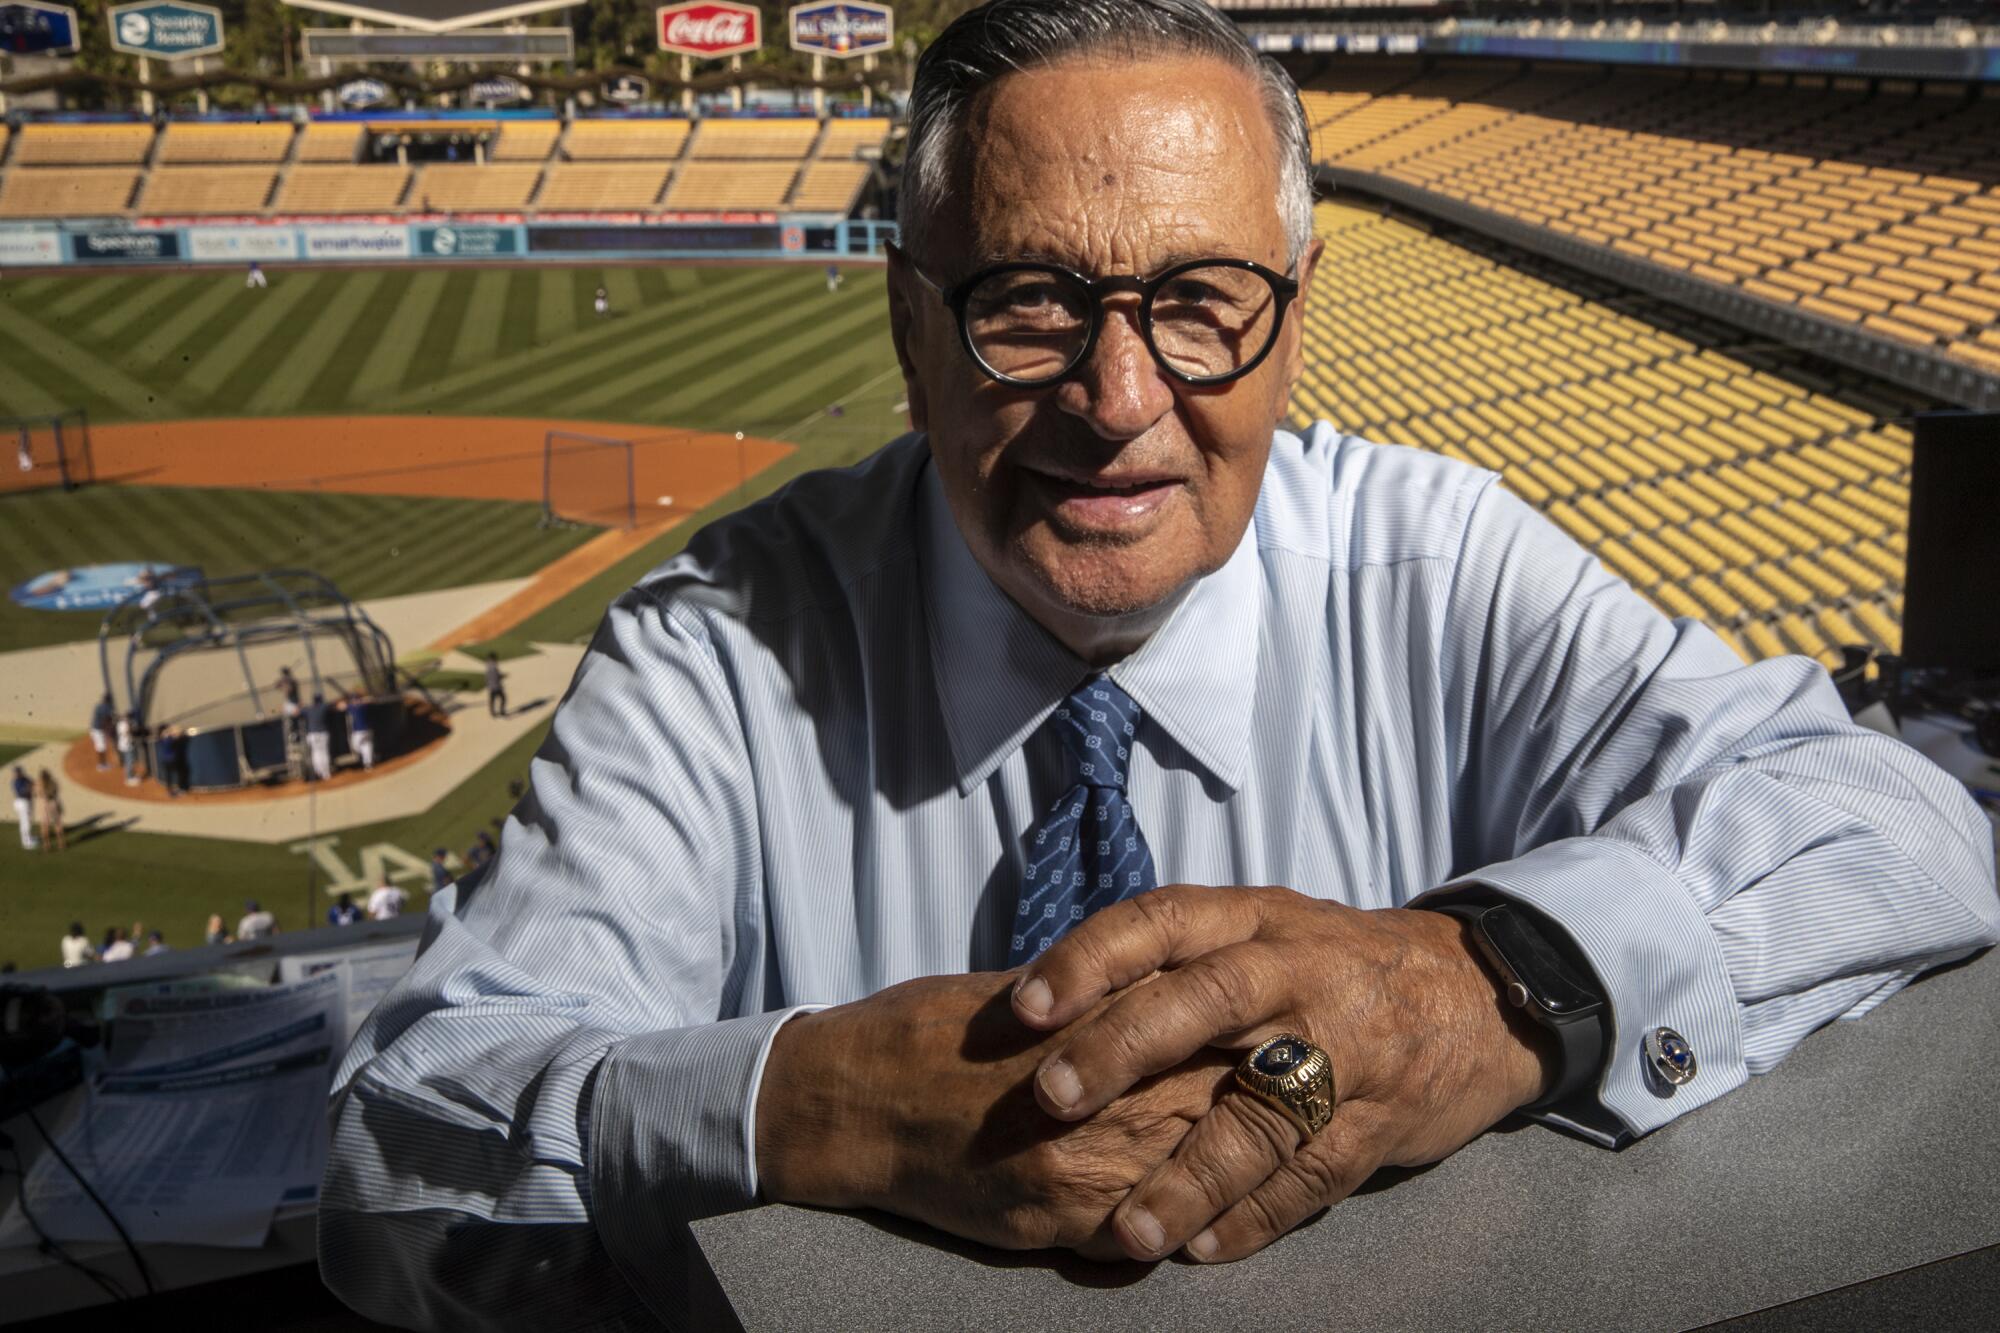 Tres and done? Dodgers broadcaster Jaime Jarrin aims for 3 more